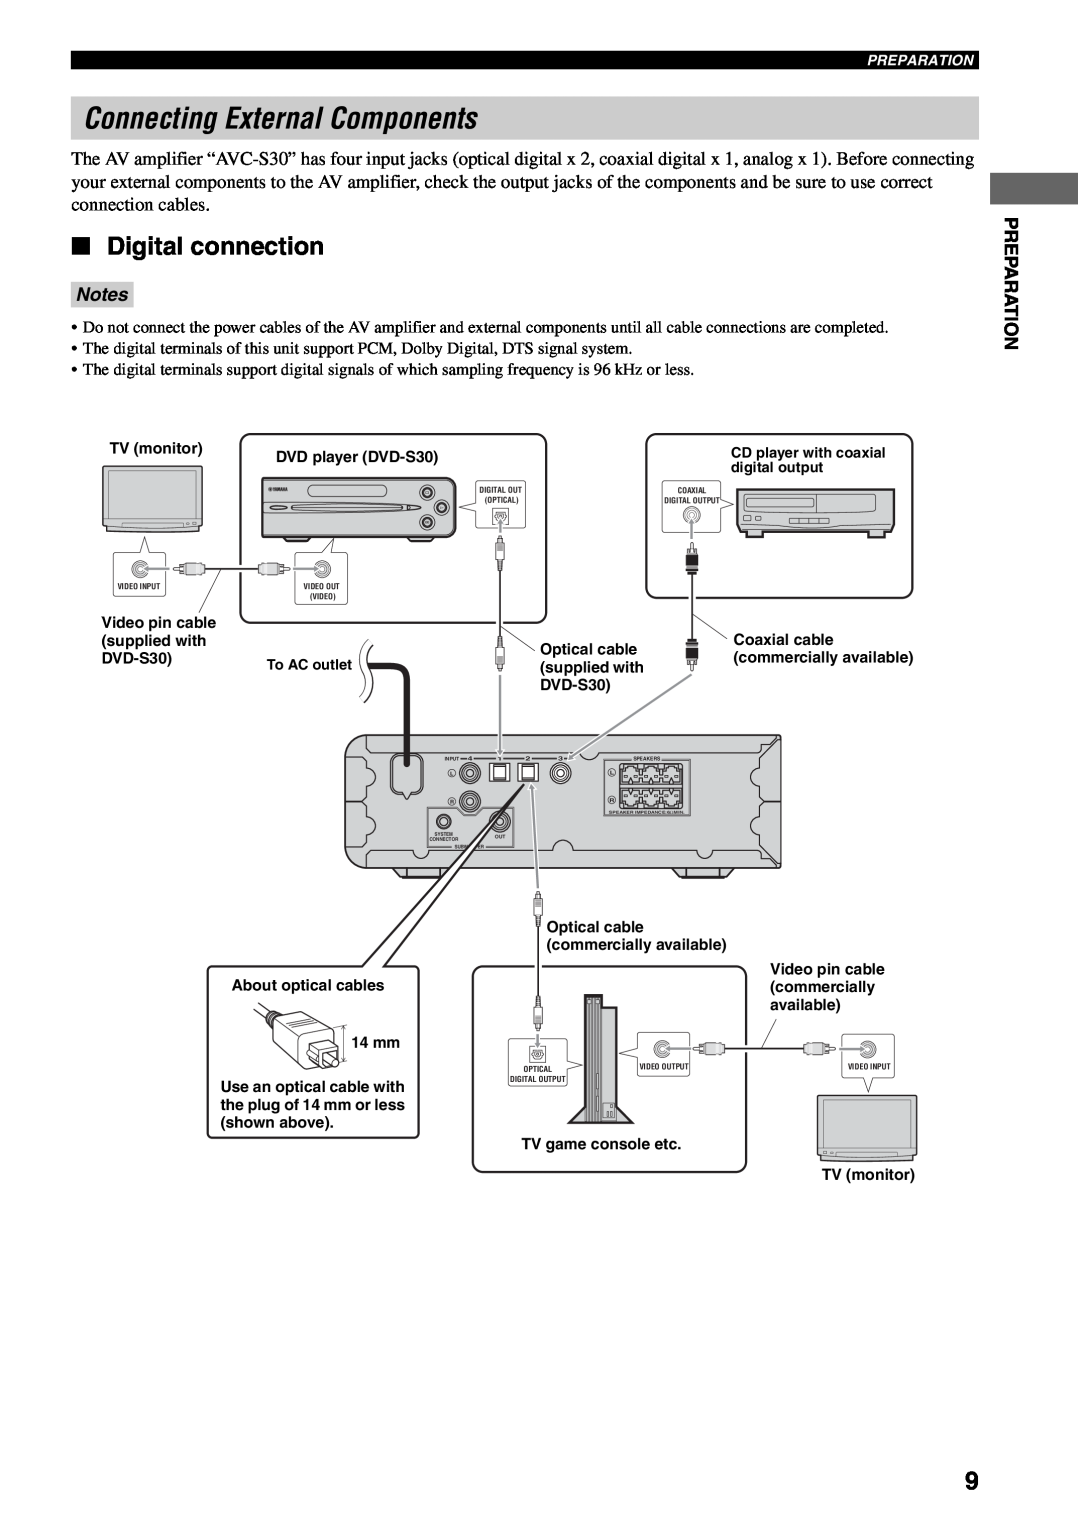 Yamaha AVX-S30 owner manual Connecting External Components, Digital connection, Notes 